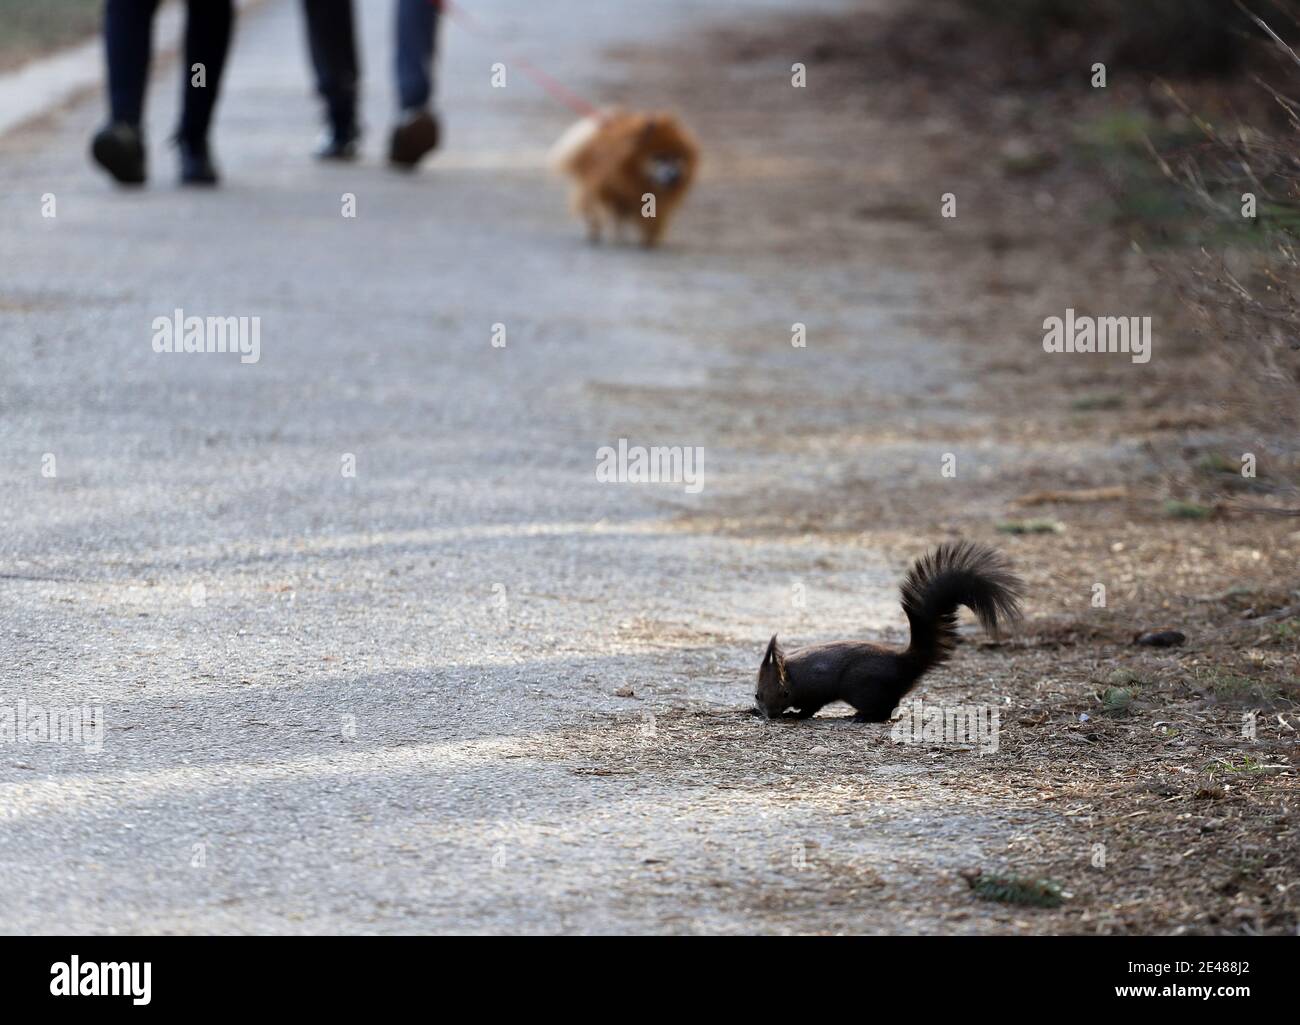 Squirrel in a park and dog Stock Photo